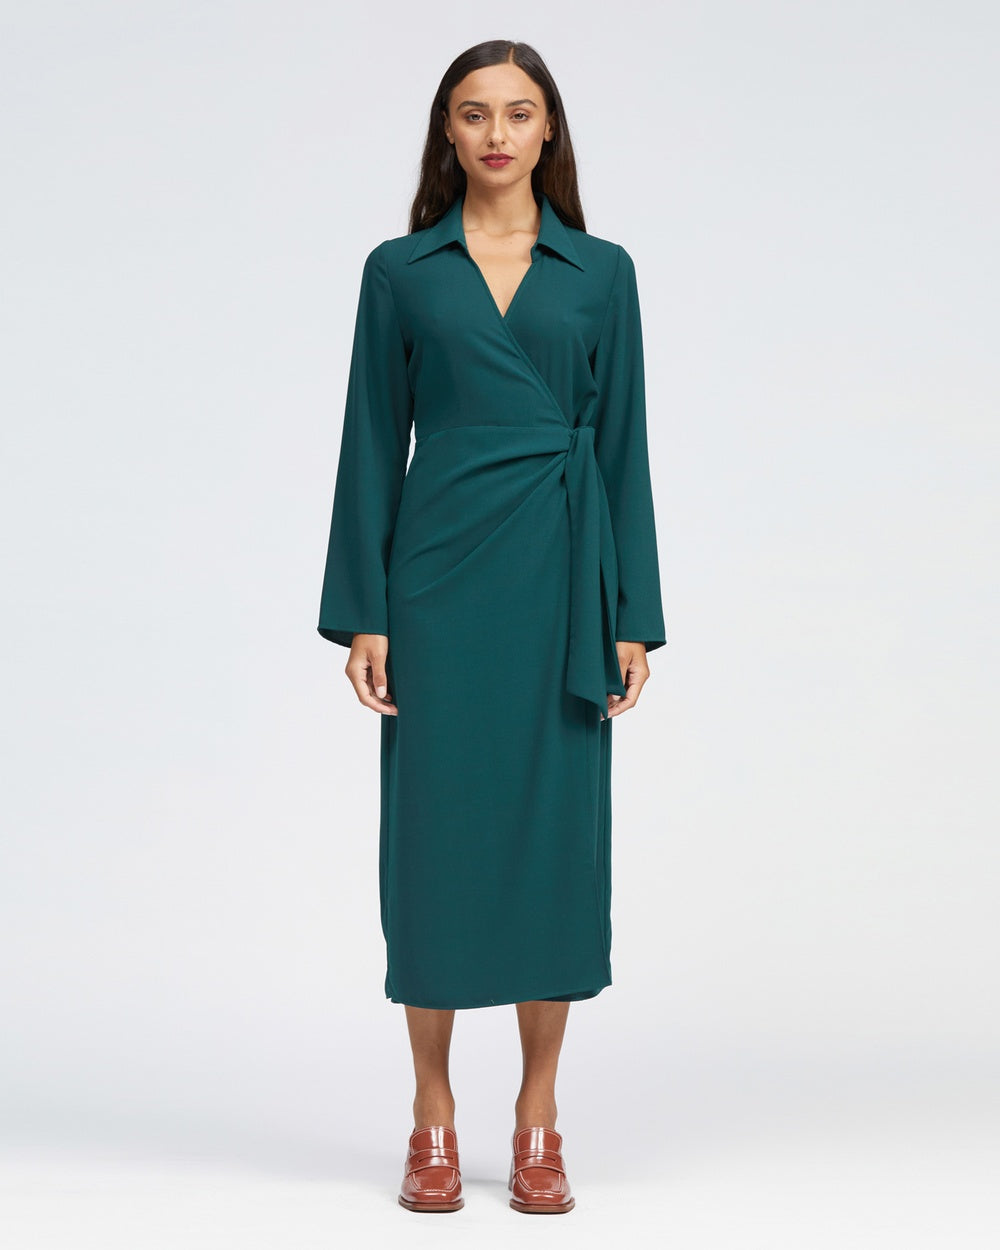 Wrap Dress to wear to work functions and beyond